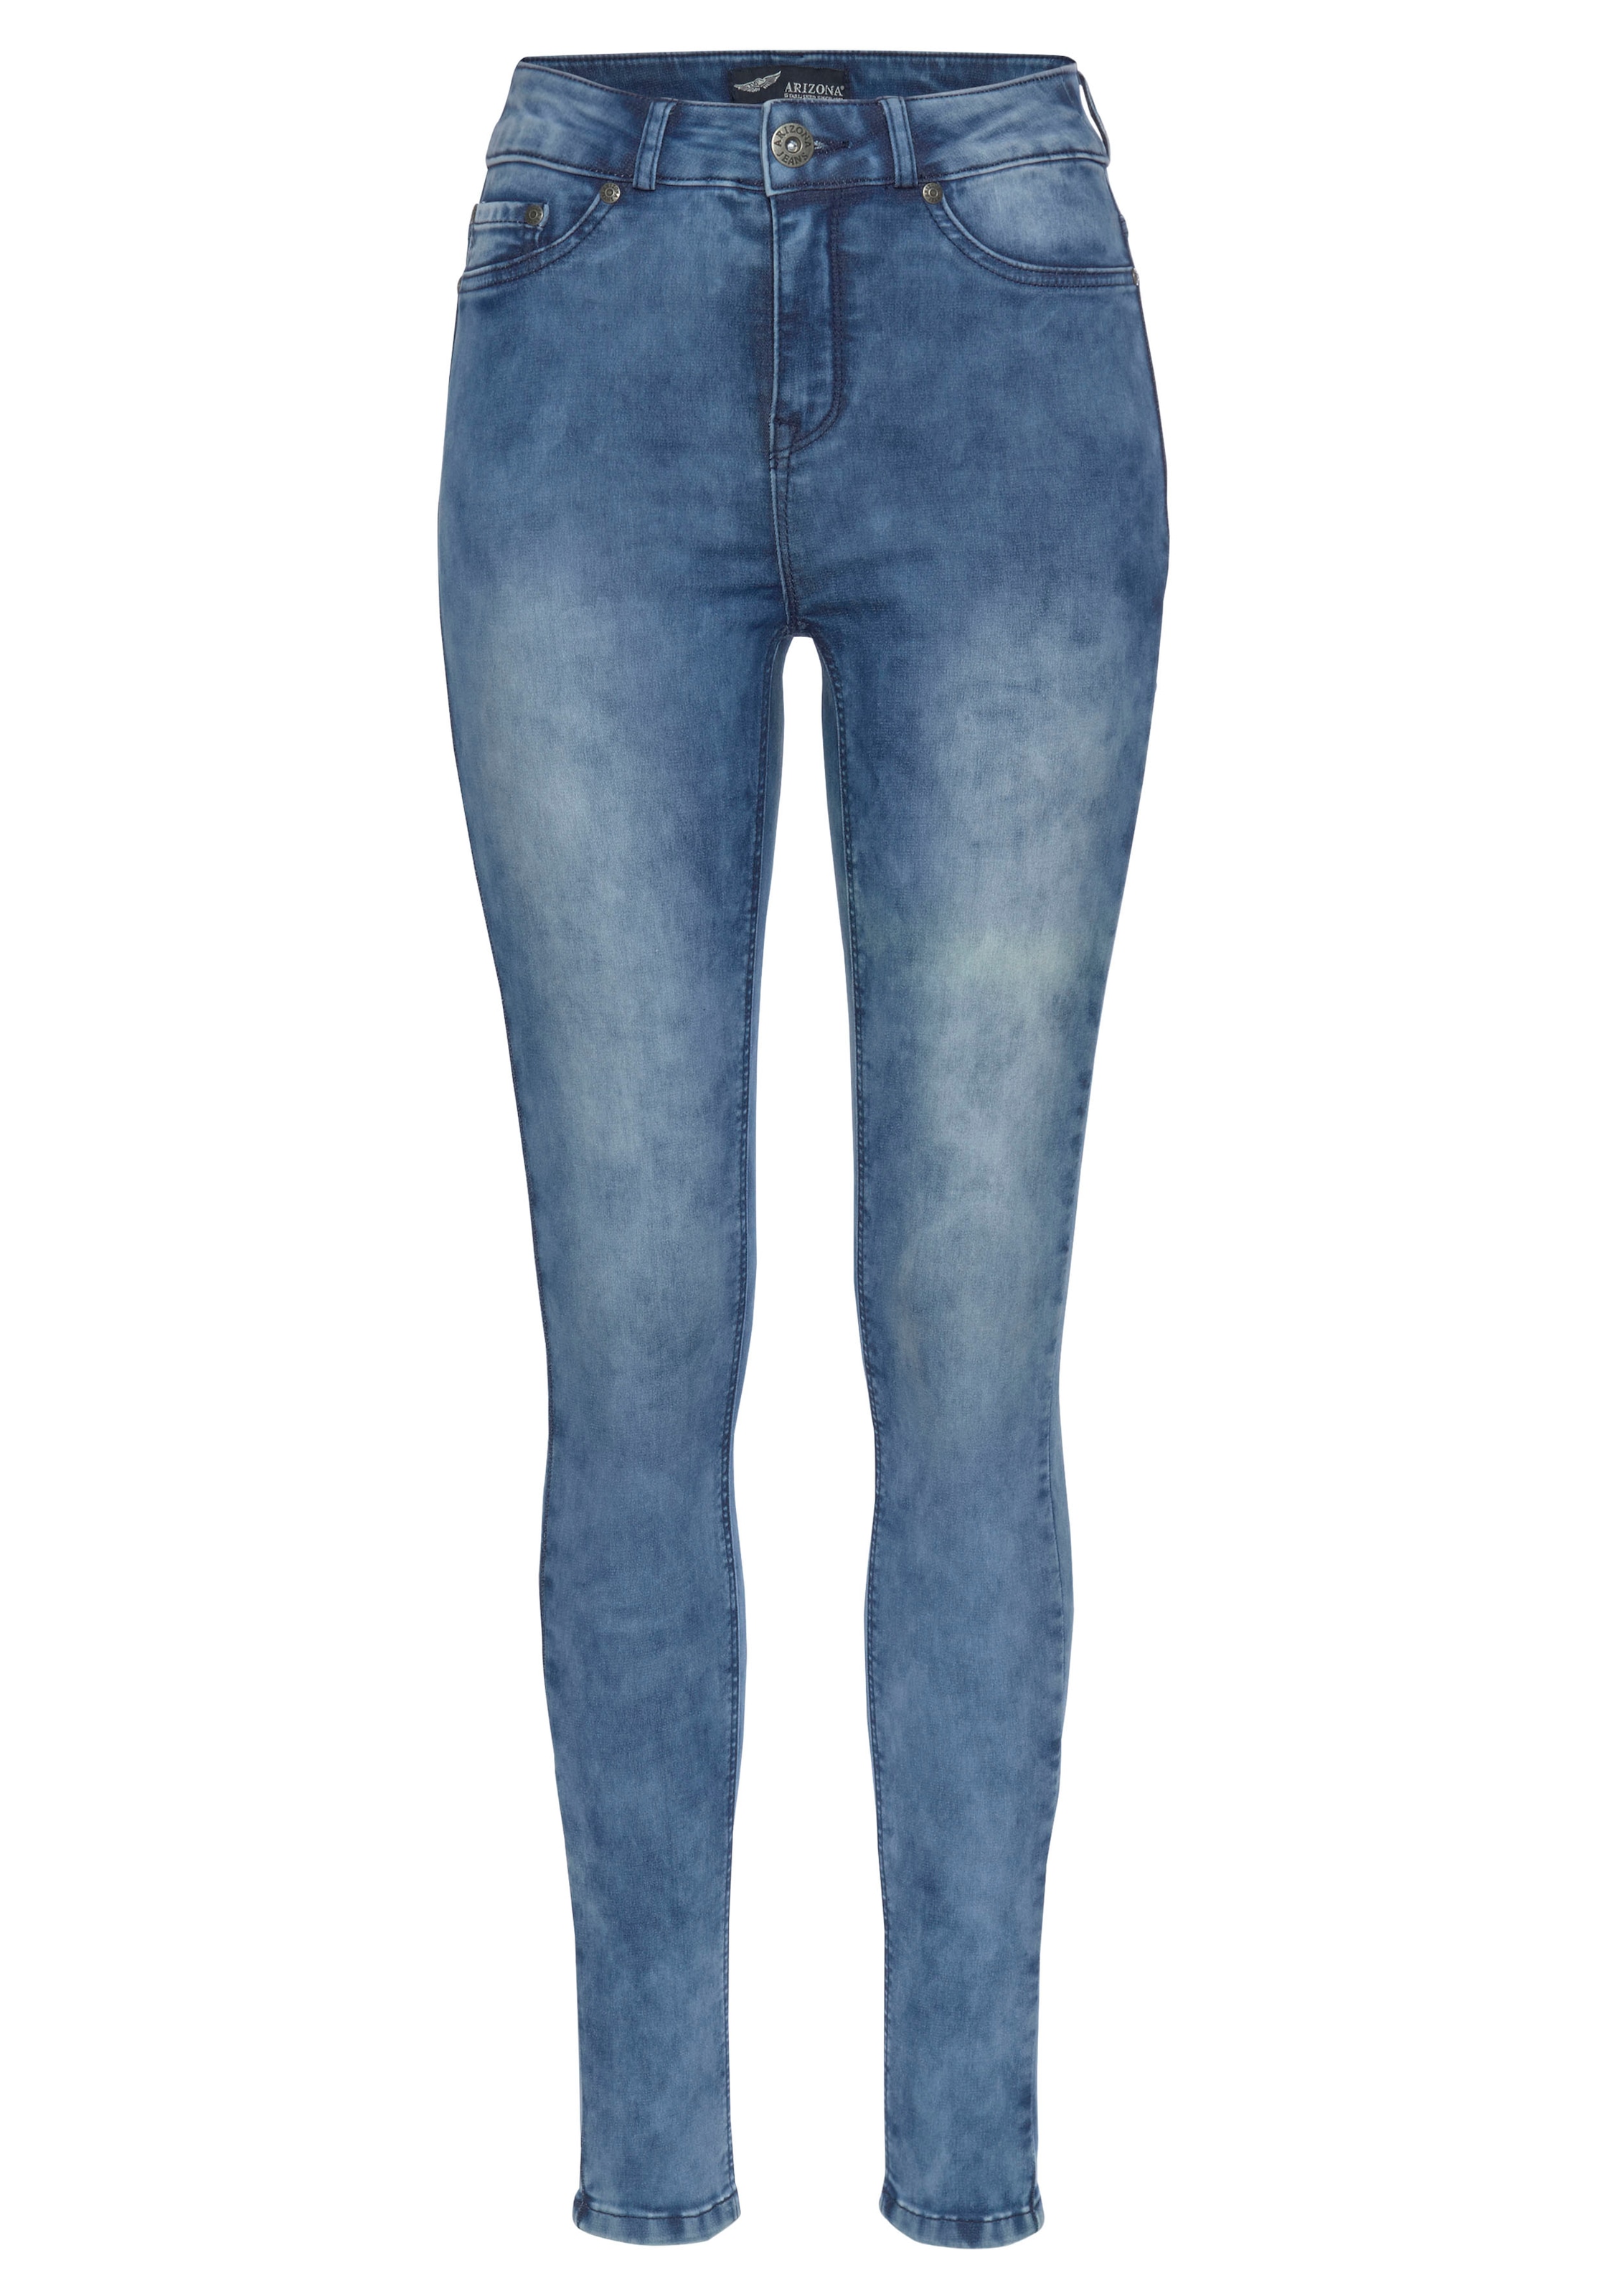 Arizona Skinny-fit-Jeans »Ultra Stretch moon washed«, Moonwashed Jeans  shoppen | I\'m walking